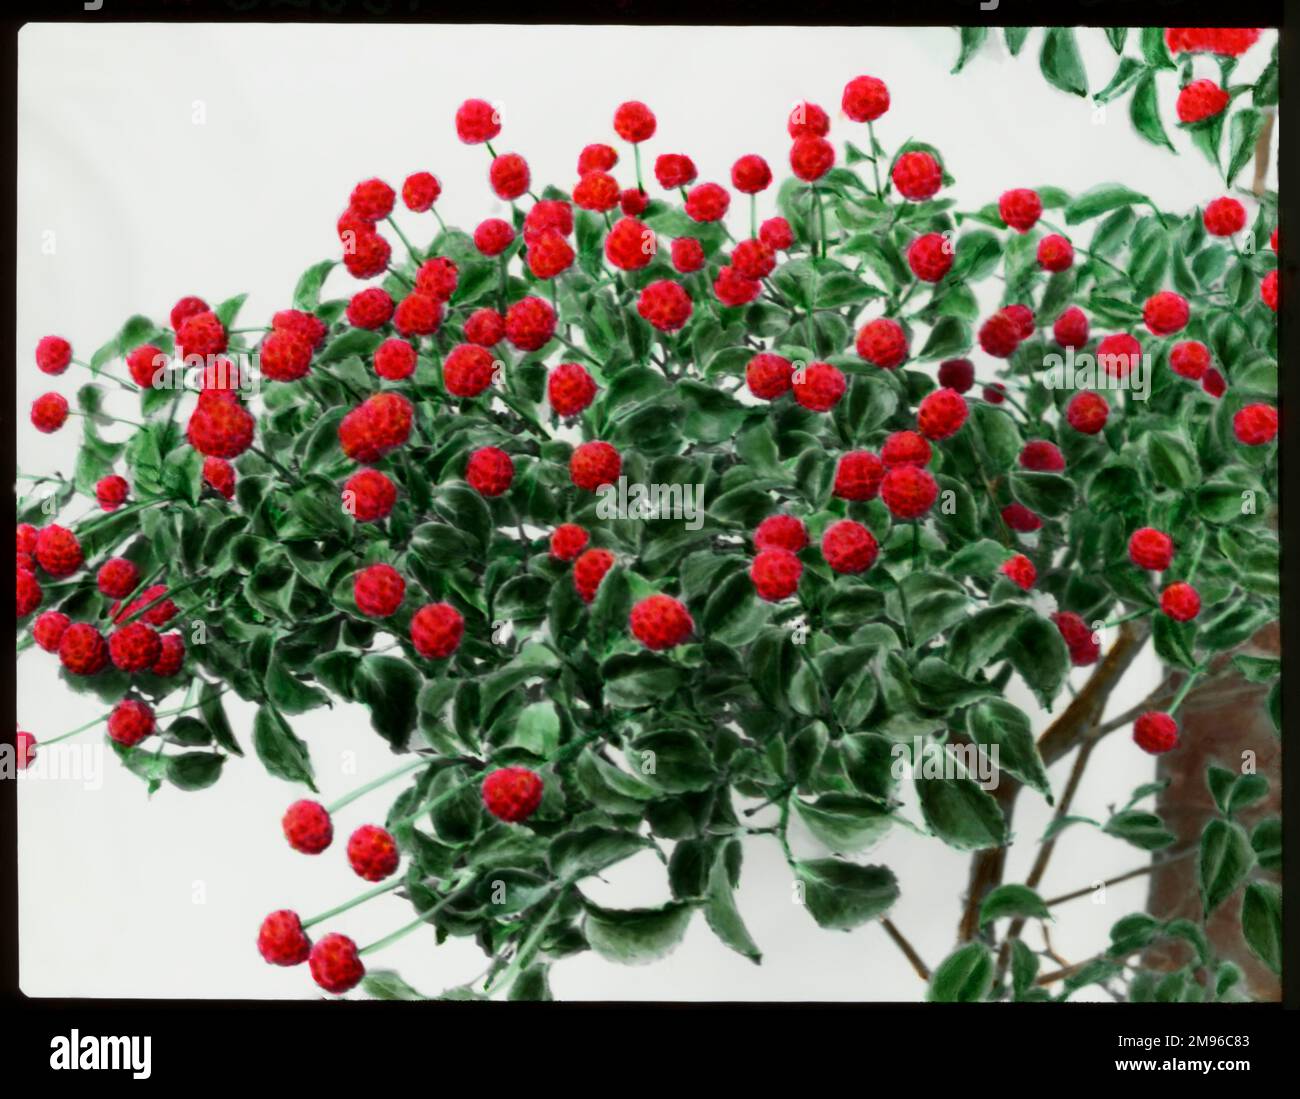 Cornus Kousa or Benthamidia Kousa (Japanese Flowering Dogwood), a hardy shrub or small tree from Japan and Korea, of the Cornaceae family.  Seen here bearing bright red berries, which are edible. Stock Photo